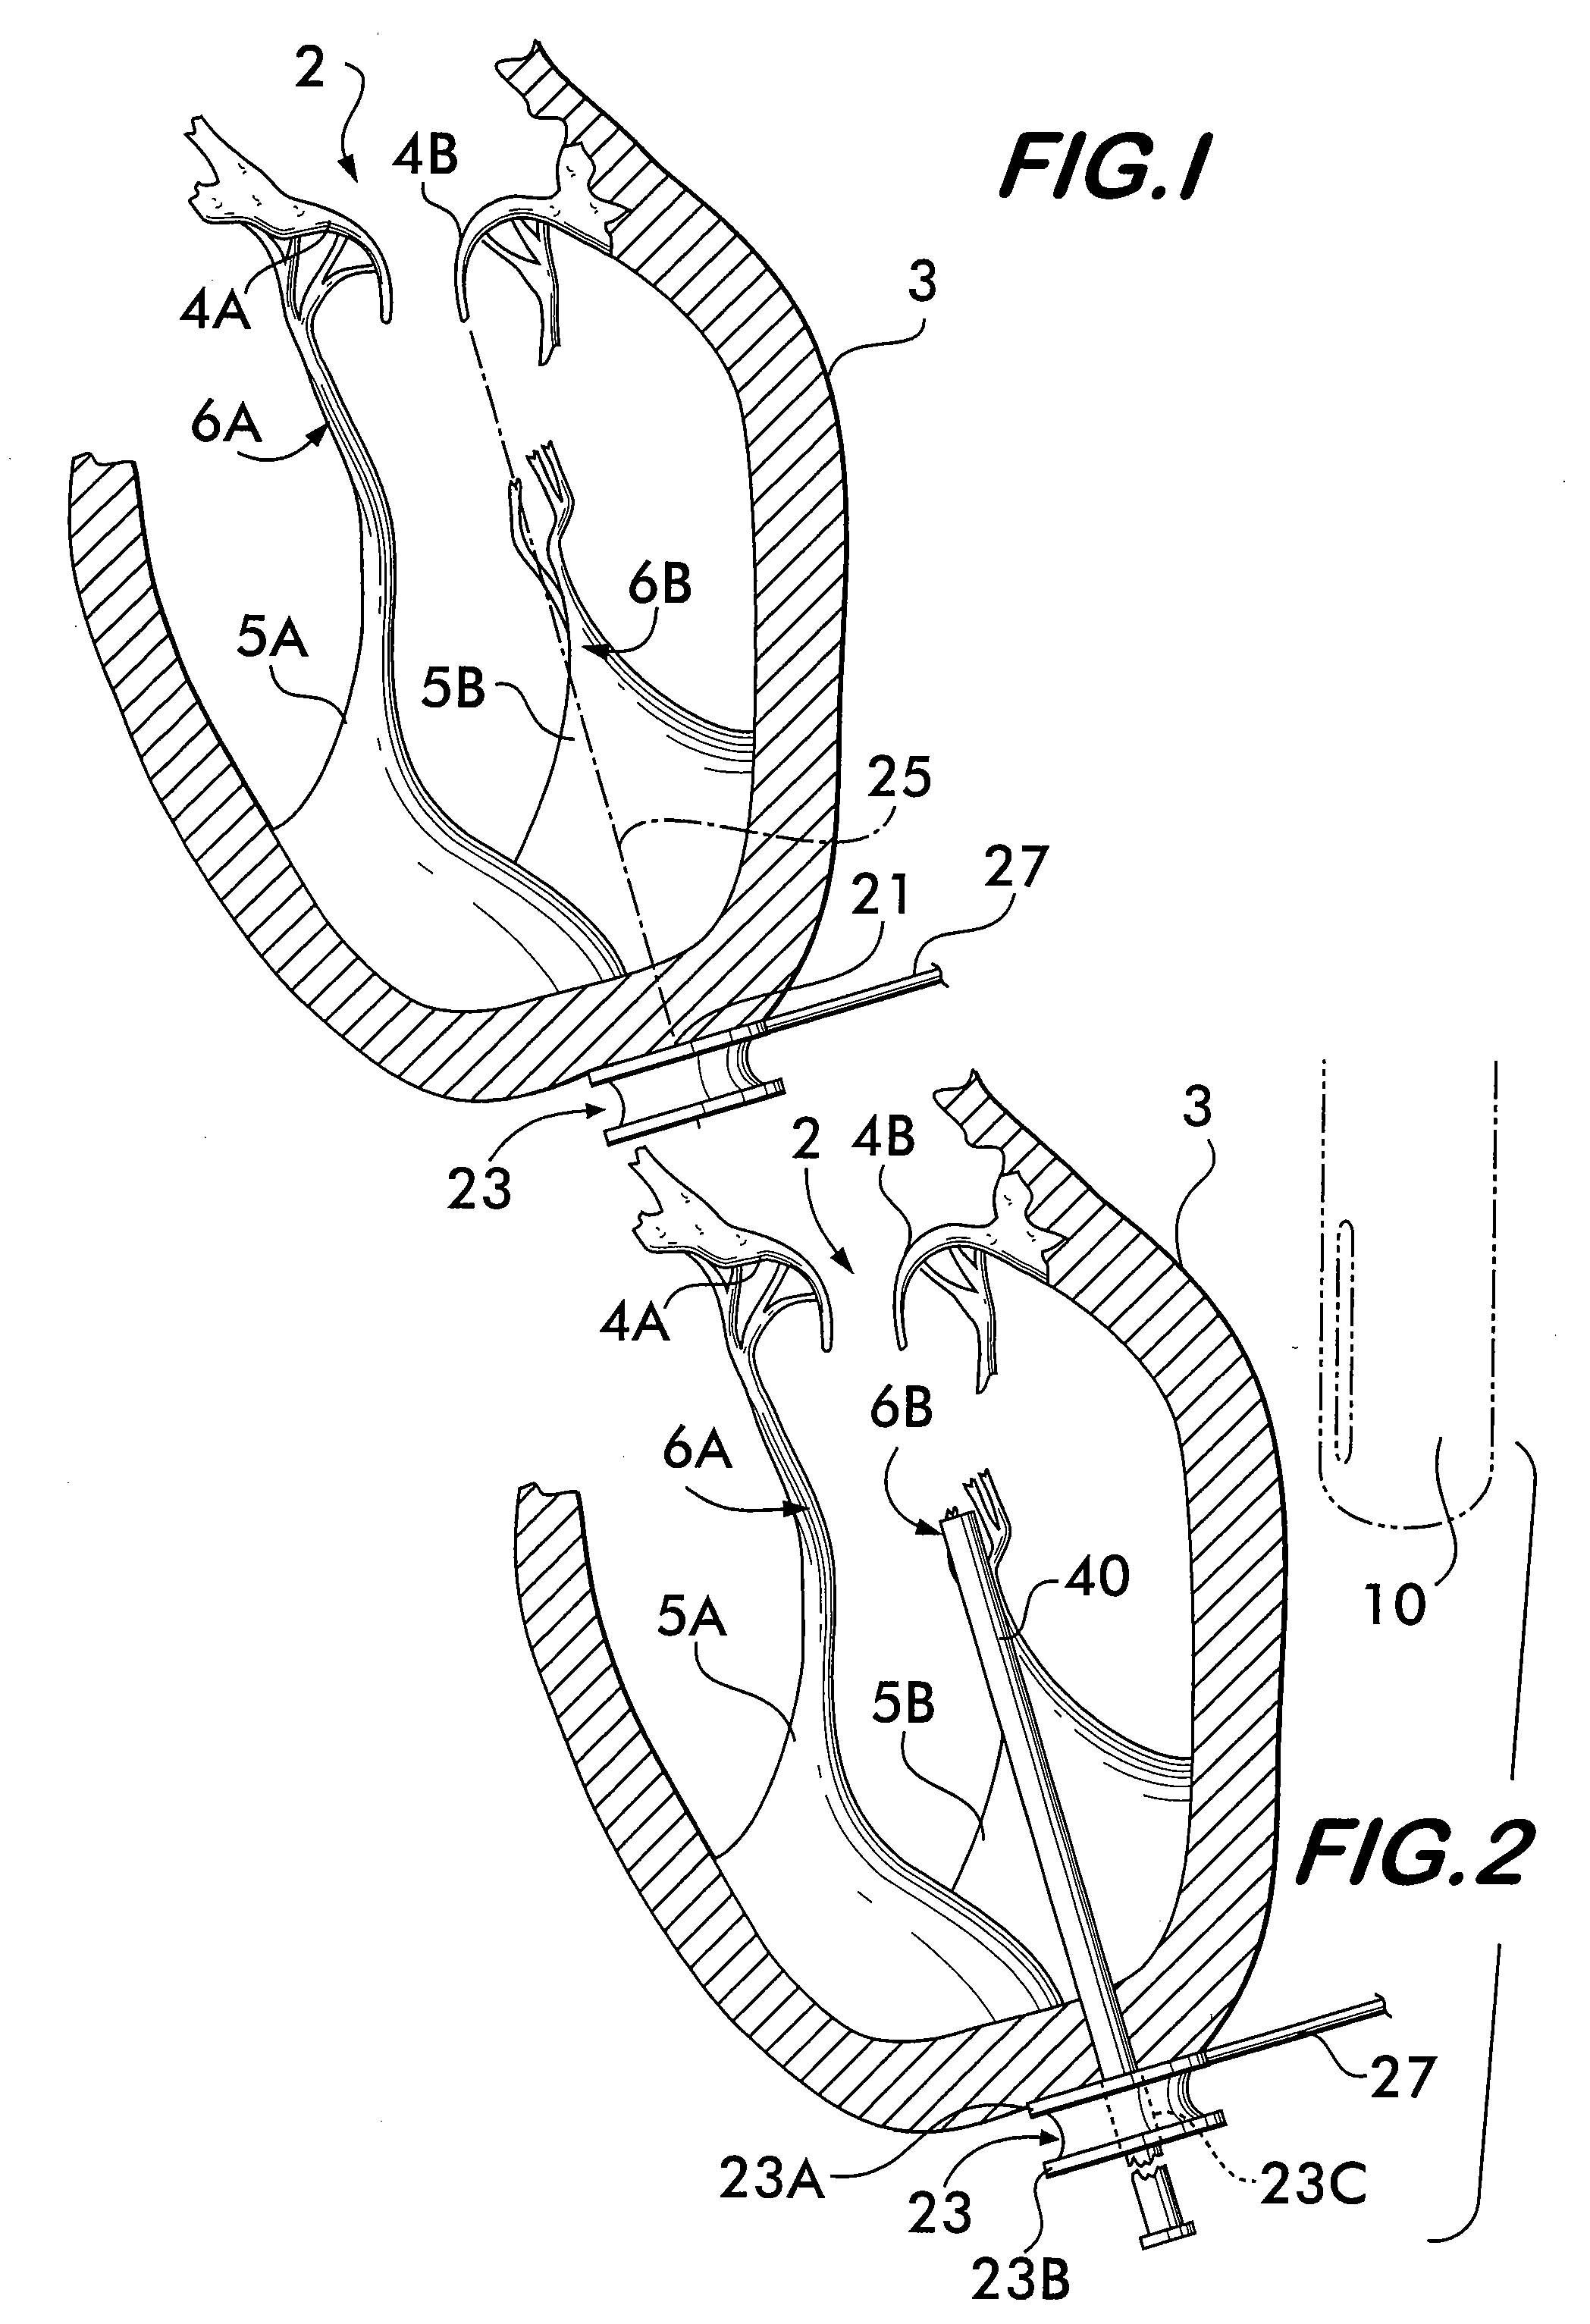 Apparatus and method for mitral valve repair without cardiopulmonary bypass, including transmural techniques